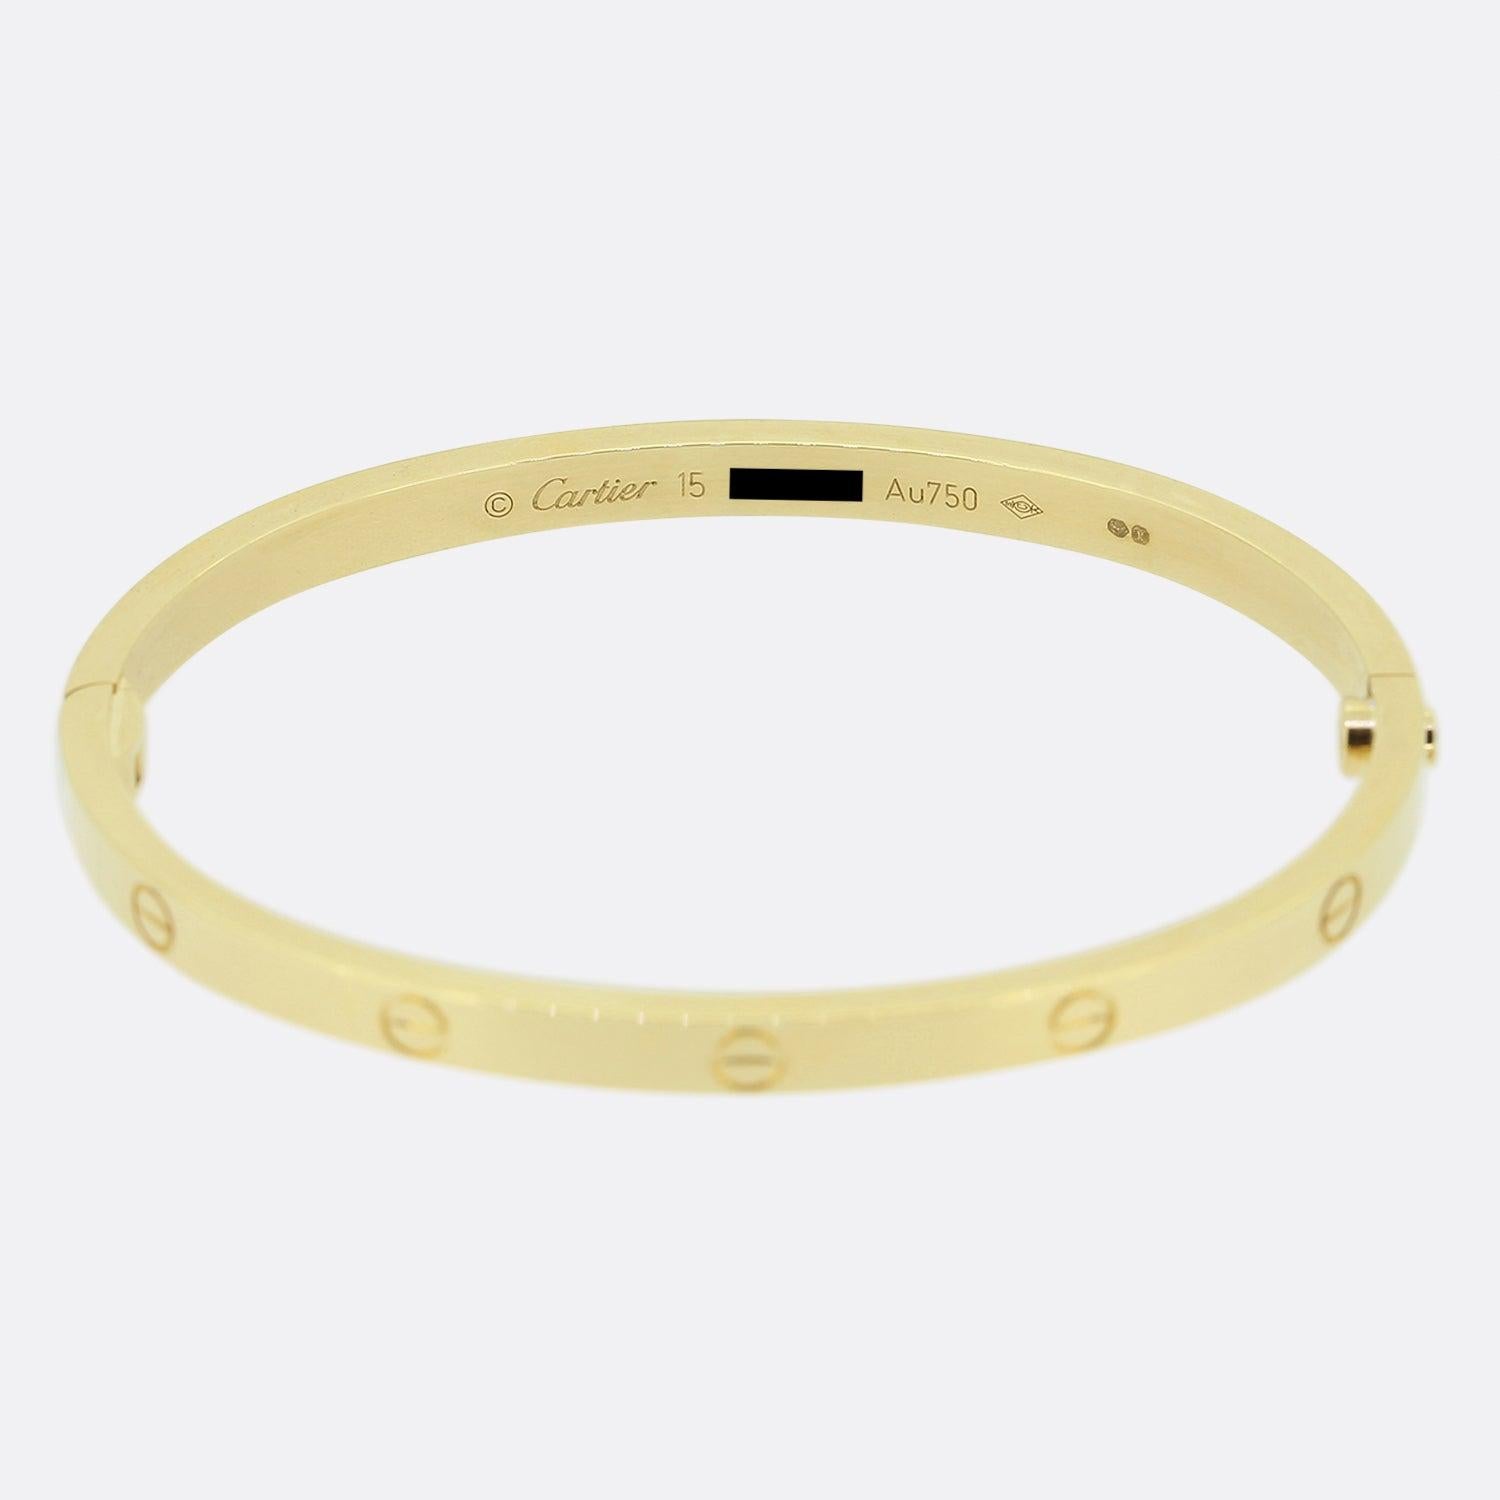 Here we have an 18ct yellow gold bangle from the world renowned luxury jewellery house of Cartier. This bangle forms part of the LOVE collection and features the iconic screw motif around the entire outer edge. This is the slimmer/thin model with a